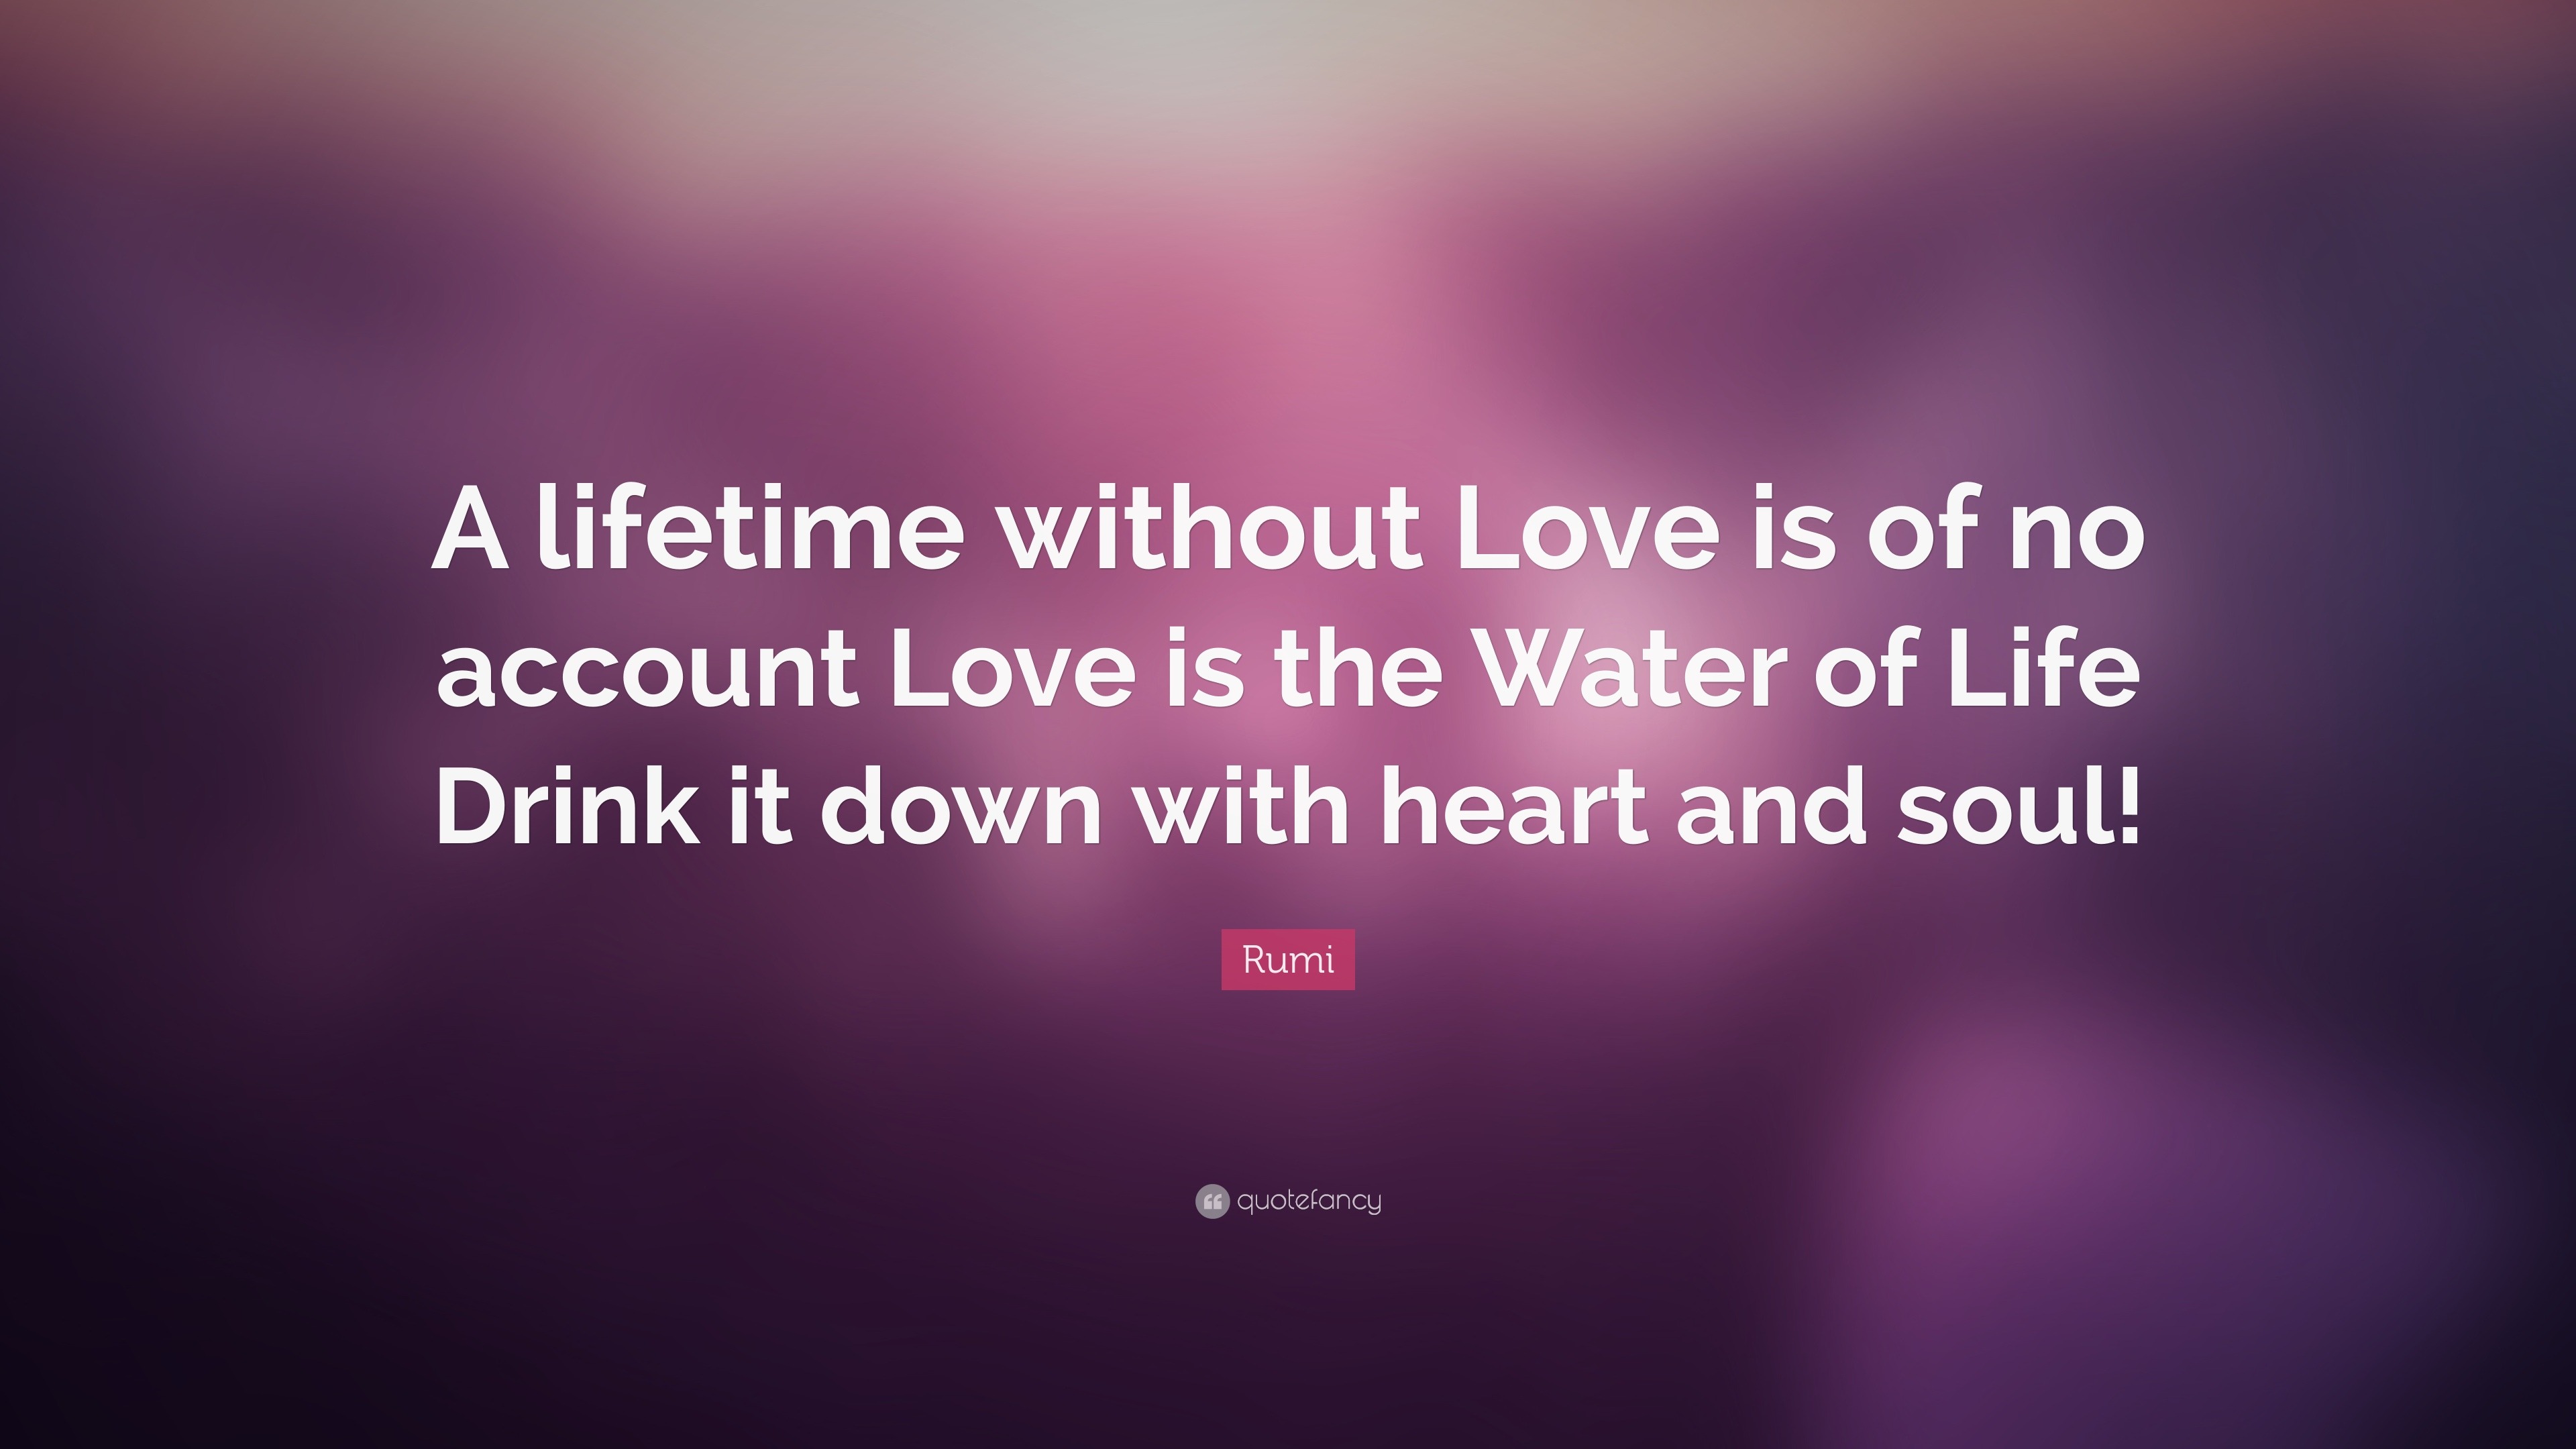 Rumi Quote “A lifetime without Love is of no account Love is the Water